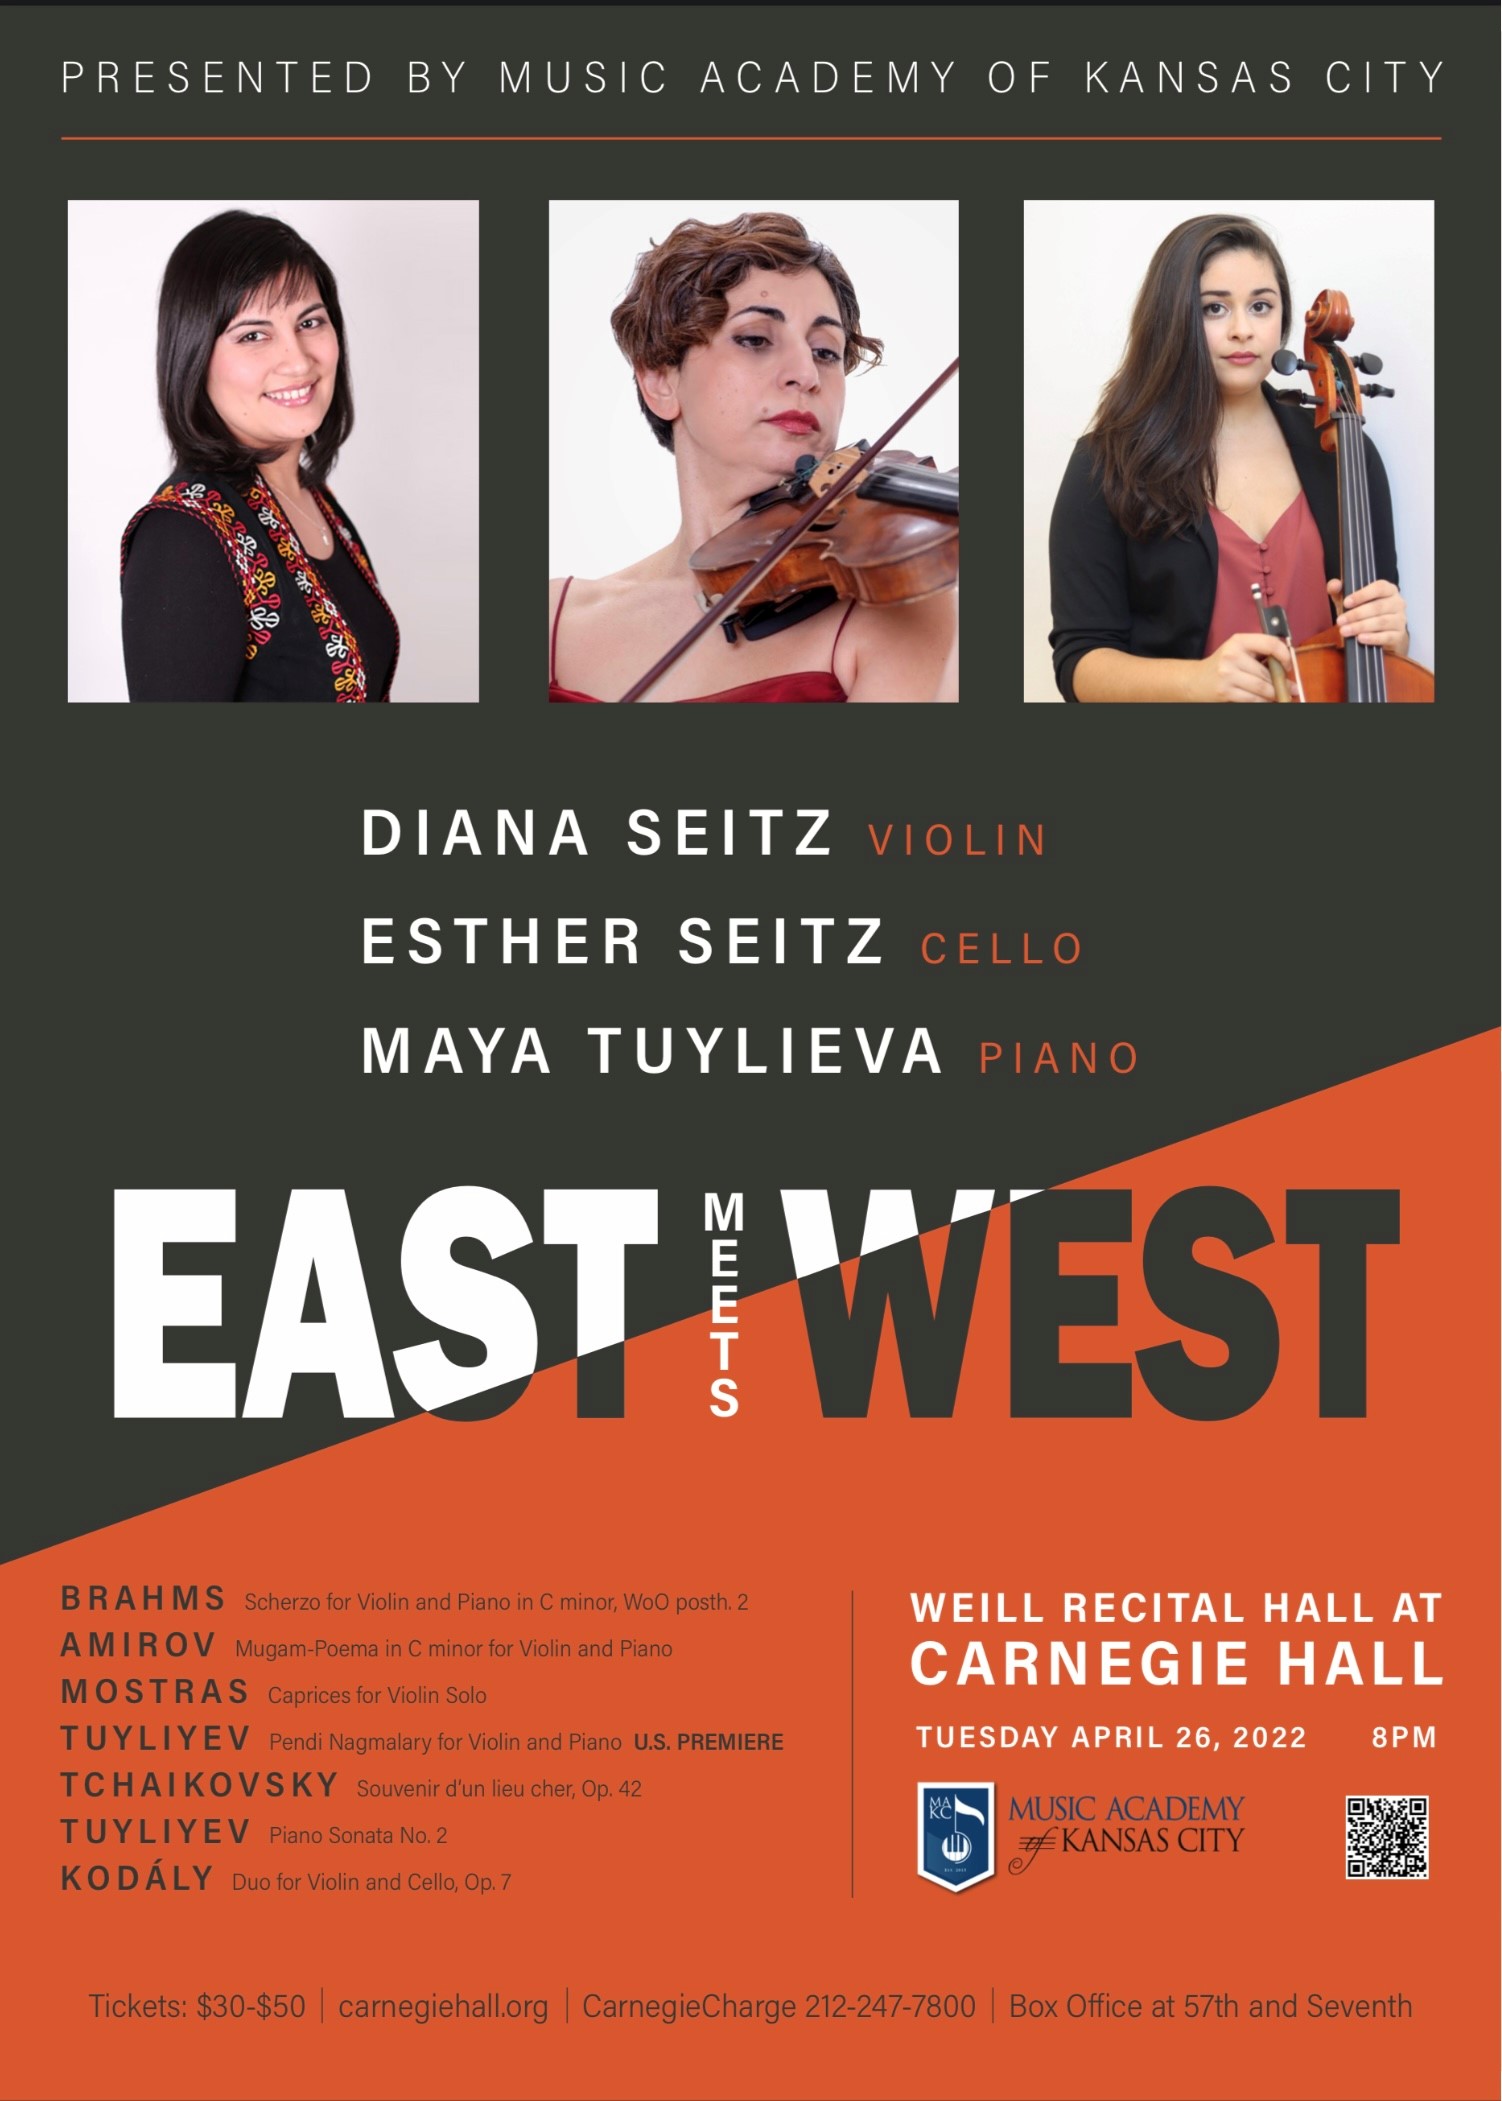 The poster for “East Meets West,” designed by Diana Seitz’s son, Josh Seitz.